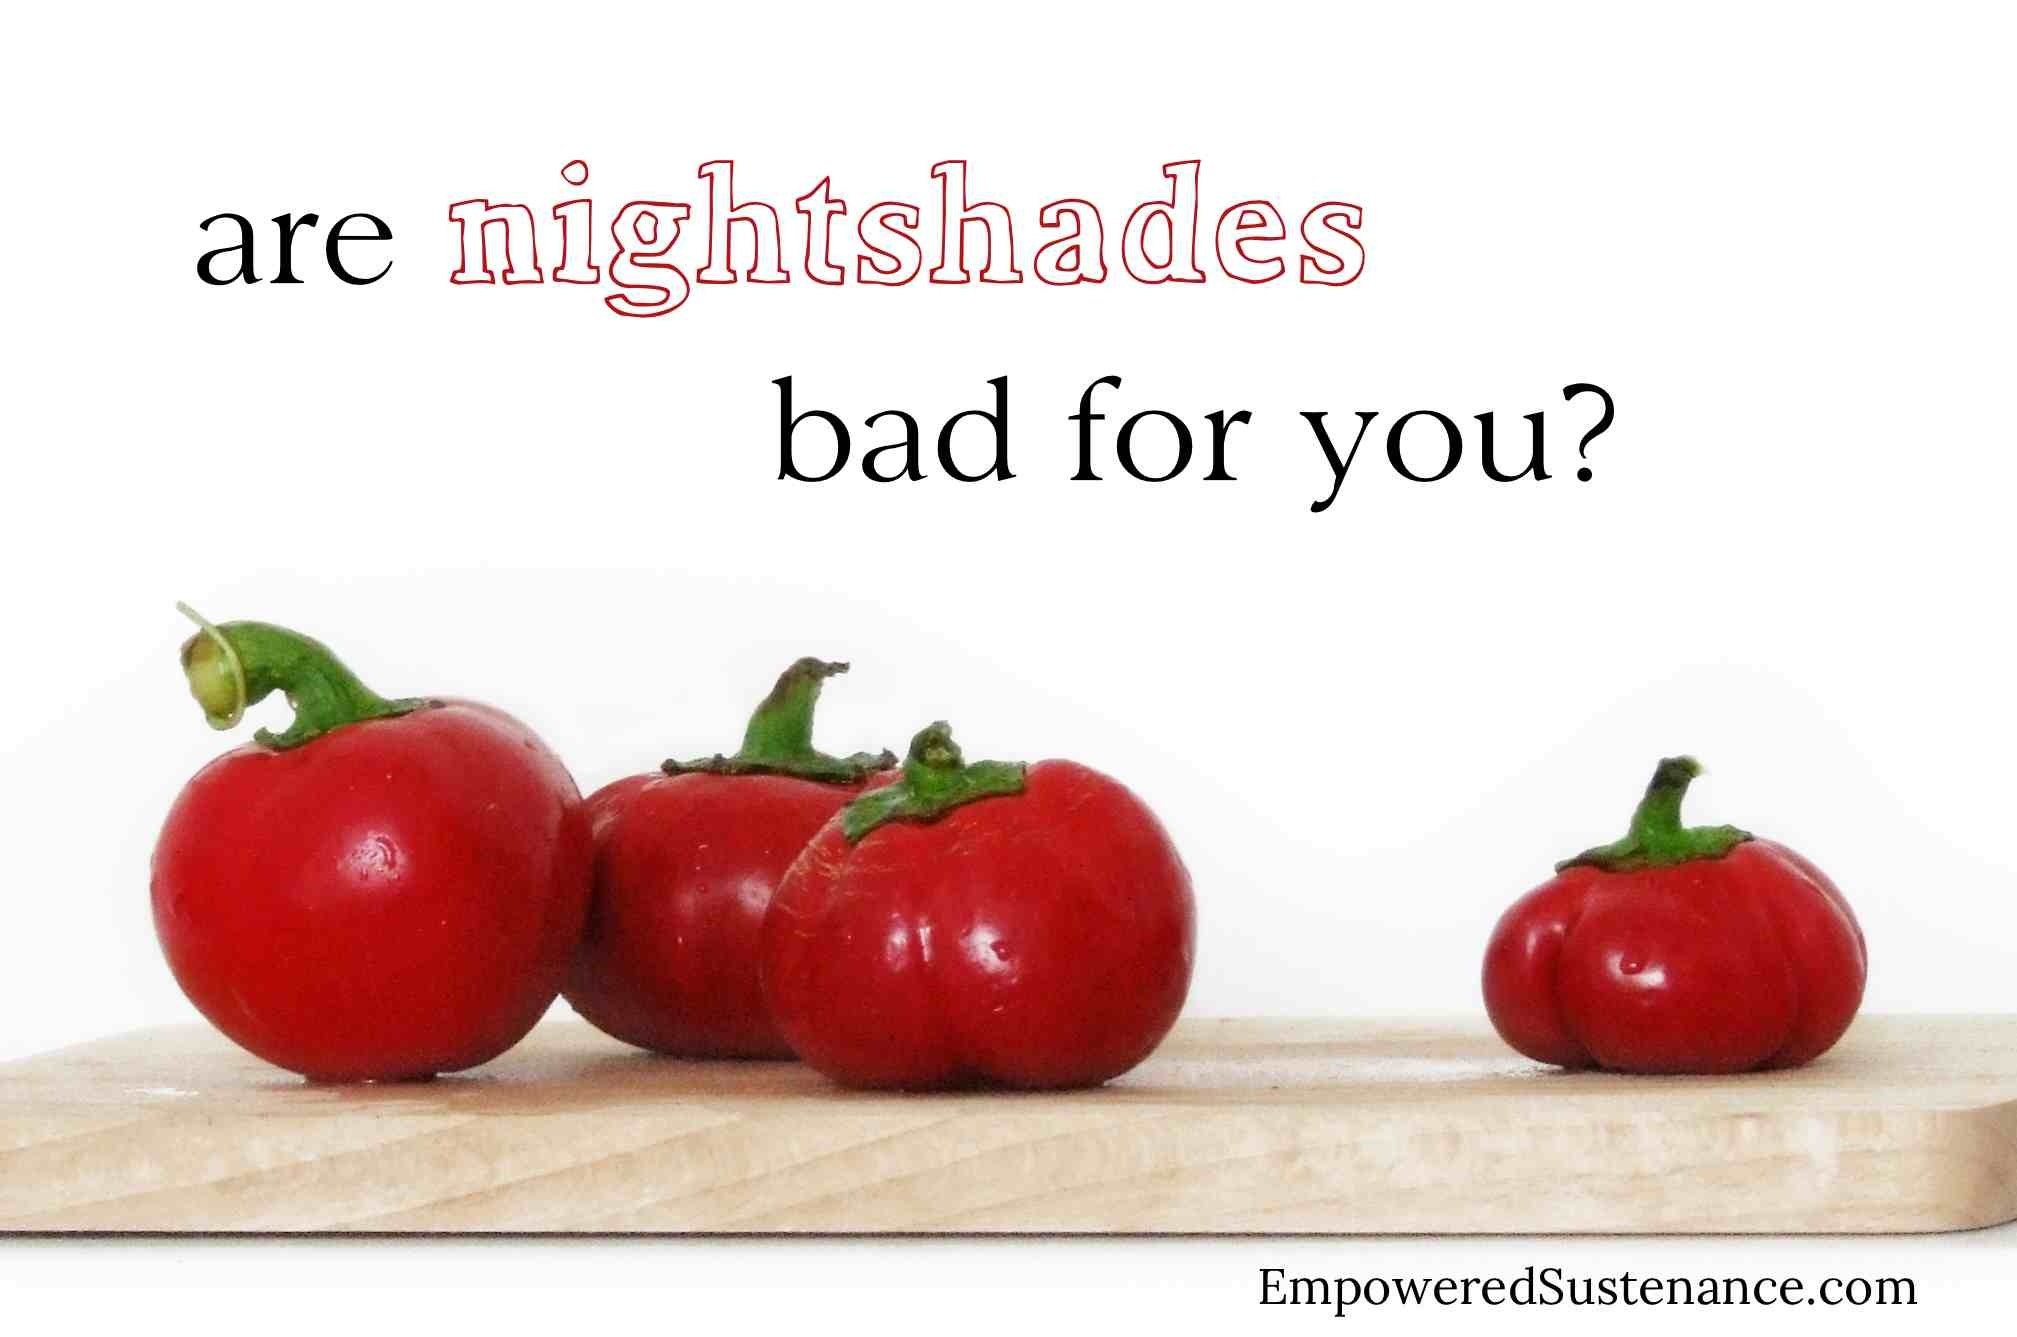 Are Nightshades Bad for You?